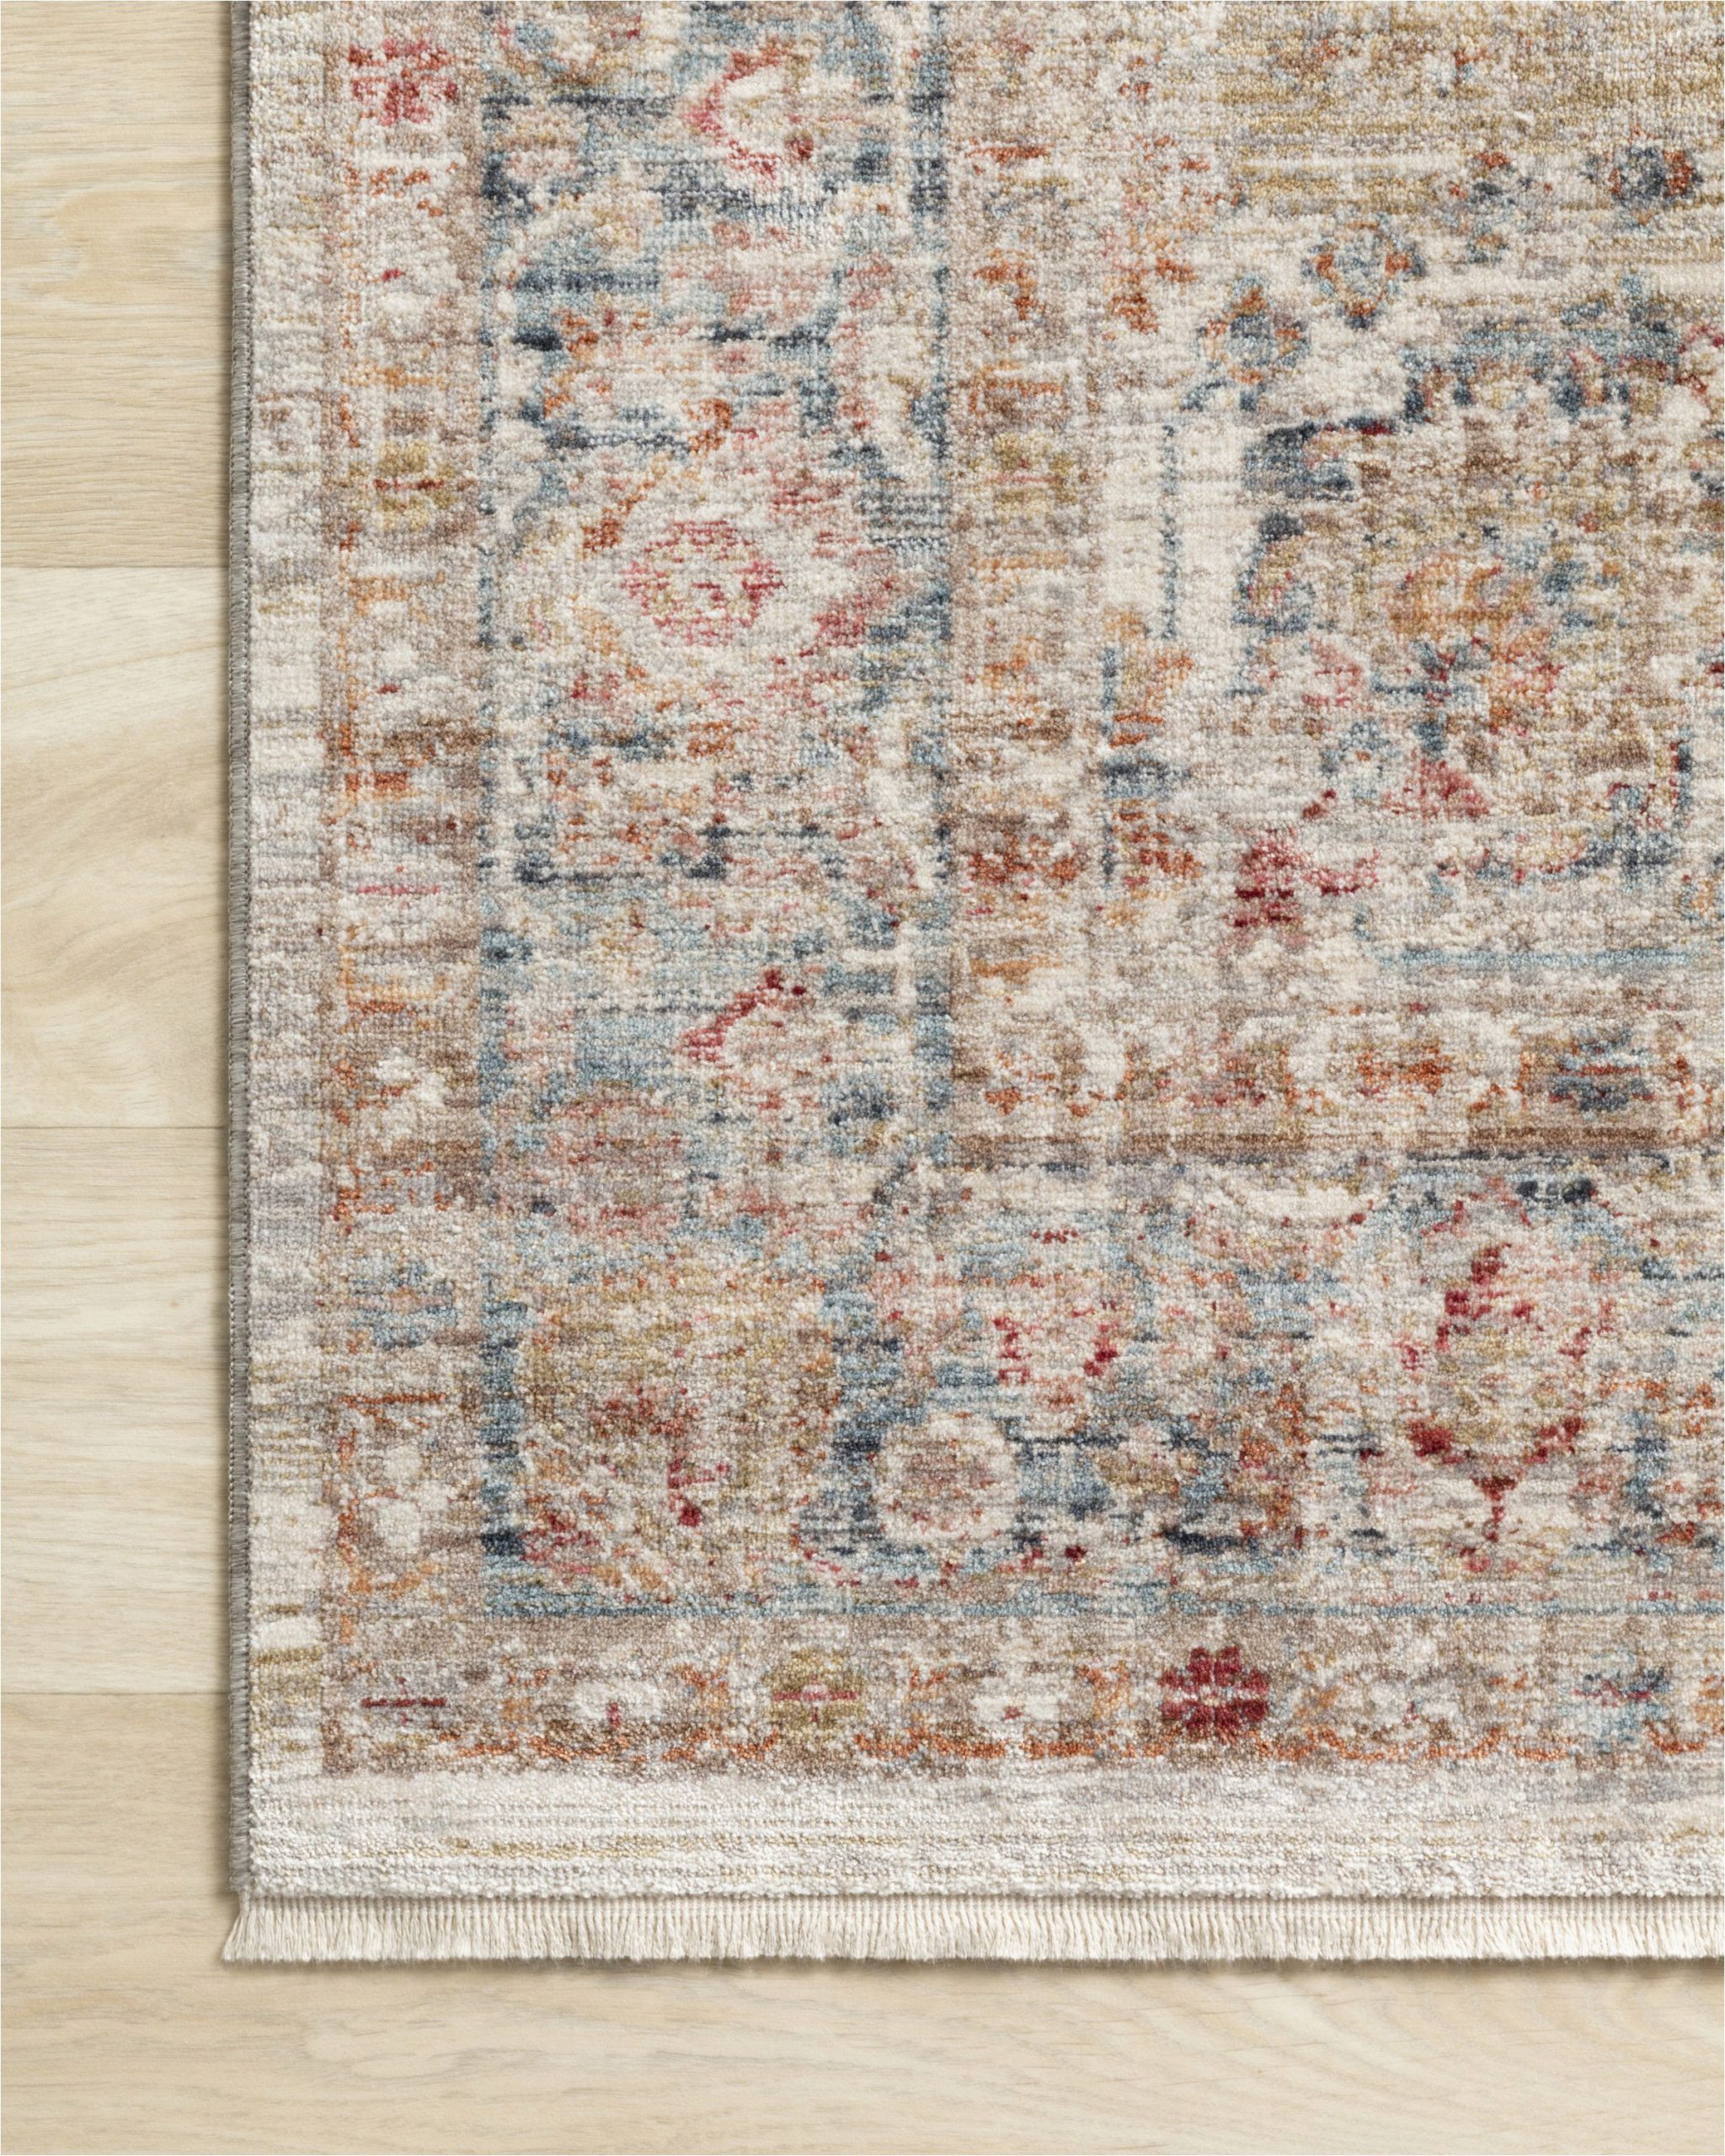 Peach and Blue Persian Style Chenille Oasis area Rug Cle 02 Color Ivory Ocean Size 11 6" X 15 7"